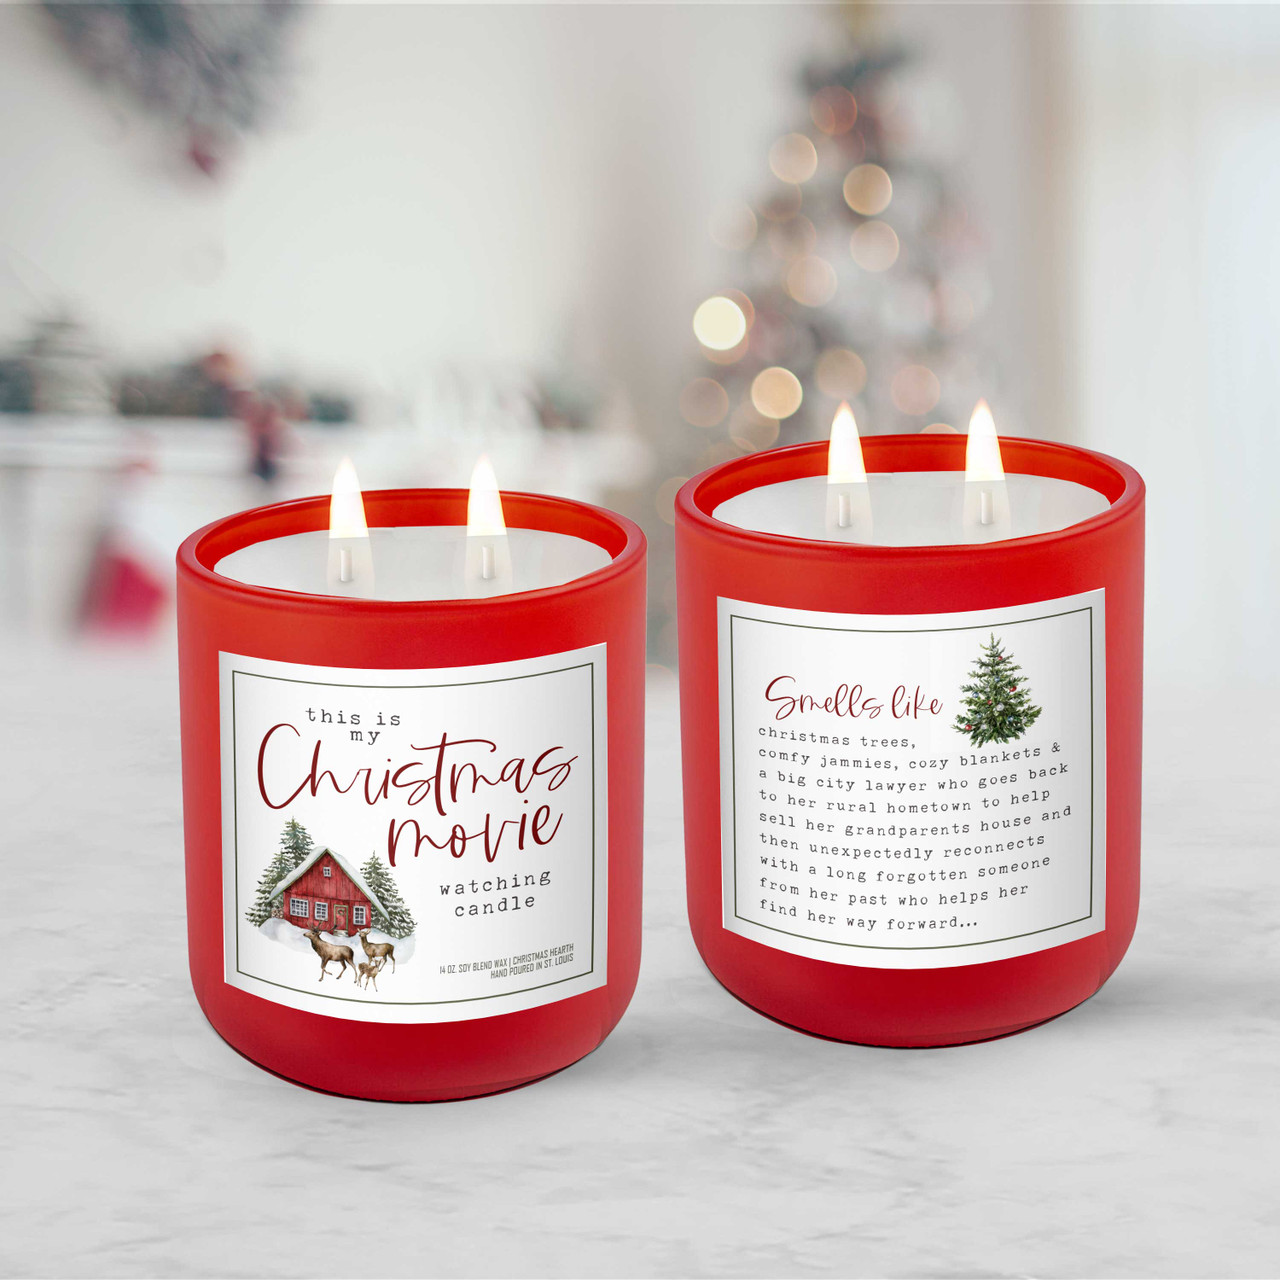 Christmas Movie Watching Candle Cranberry Red Matte Jar Christmas Soy Blend  Wax Candle Sweet Holiday Gift Candle for Family or Friends - Etsy